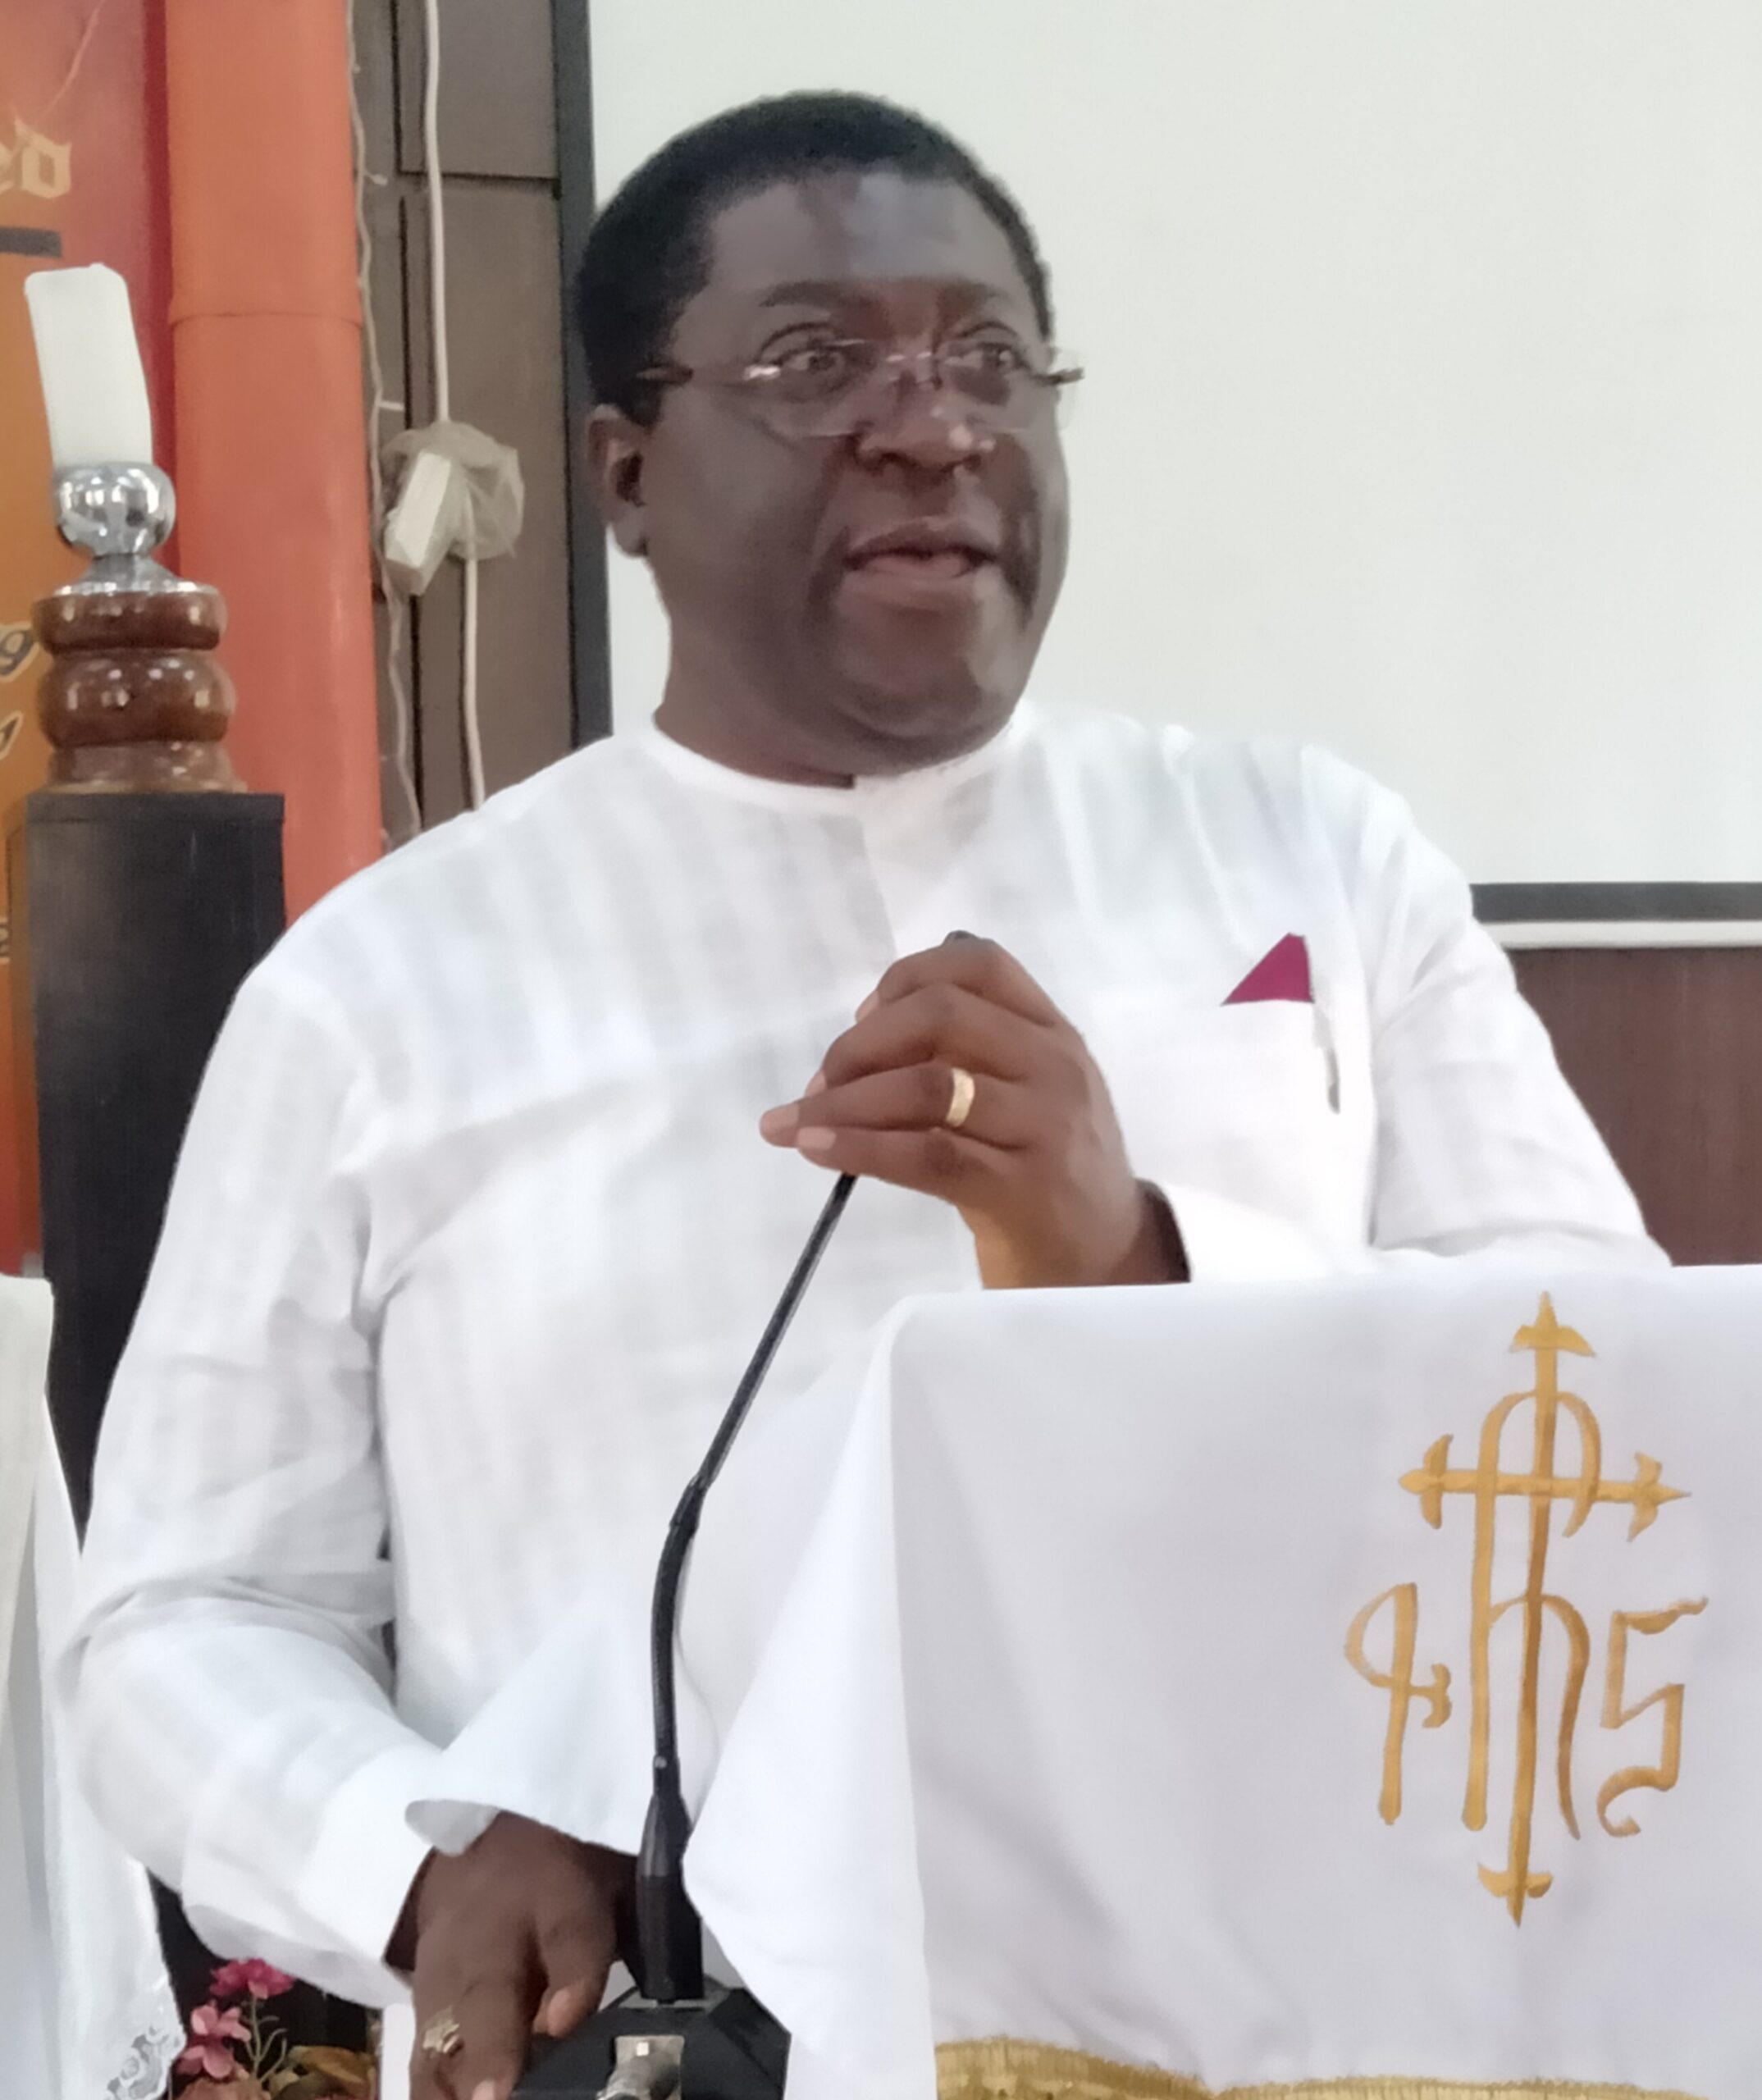 Respect For Press Freedom Will Curb Corruption, Solve Nigeria’s Security Challenges, Says Madumere